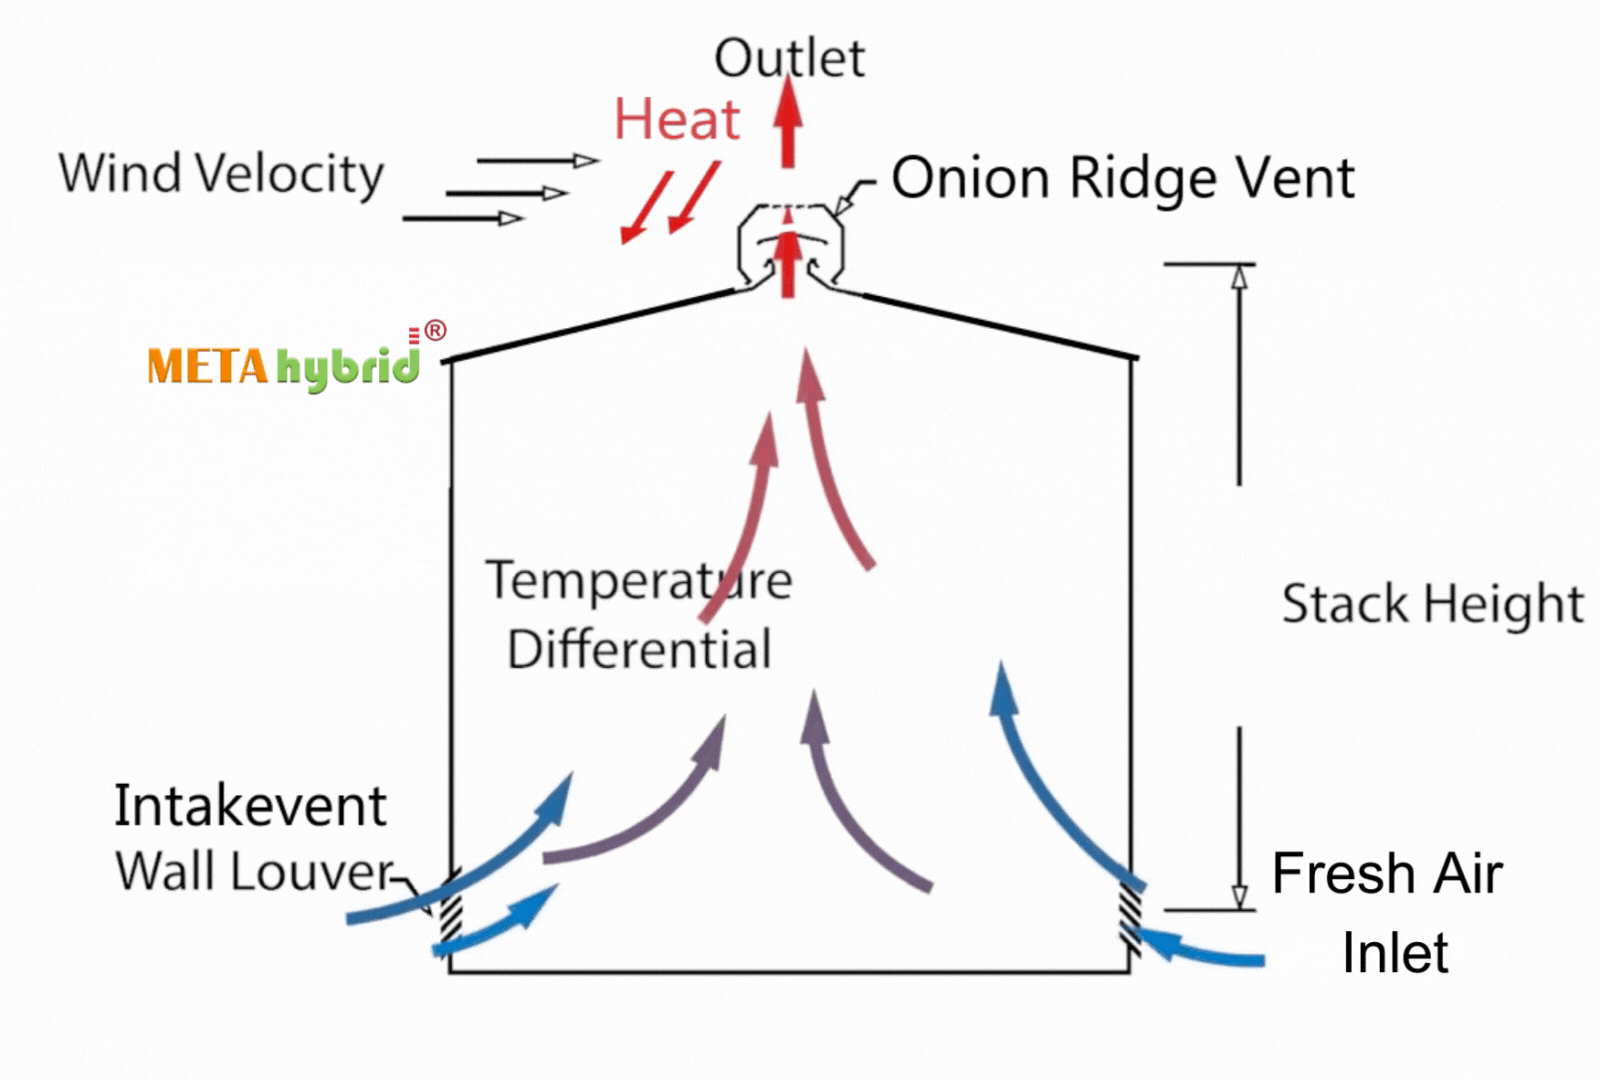 how effective is the ridge vent for the proper air changing cycle